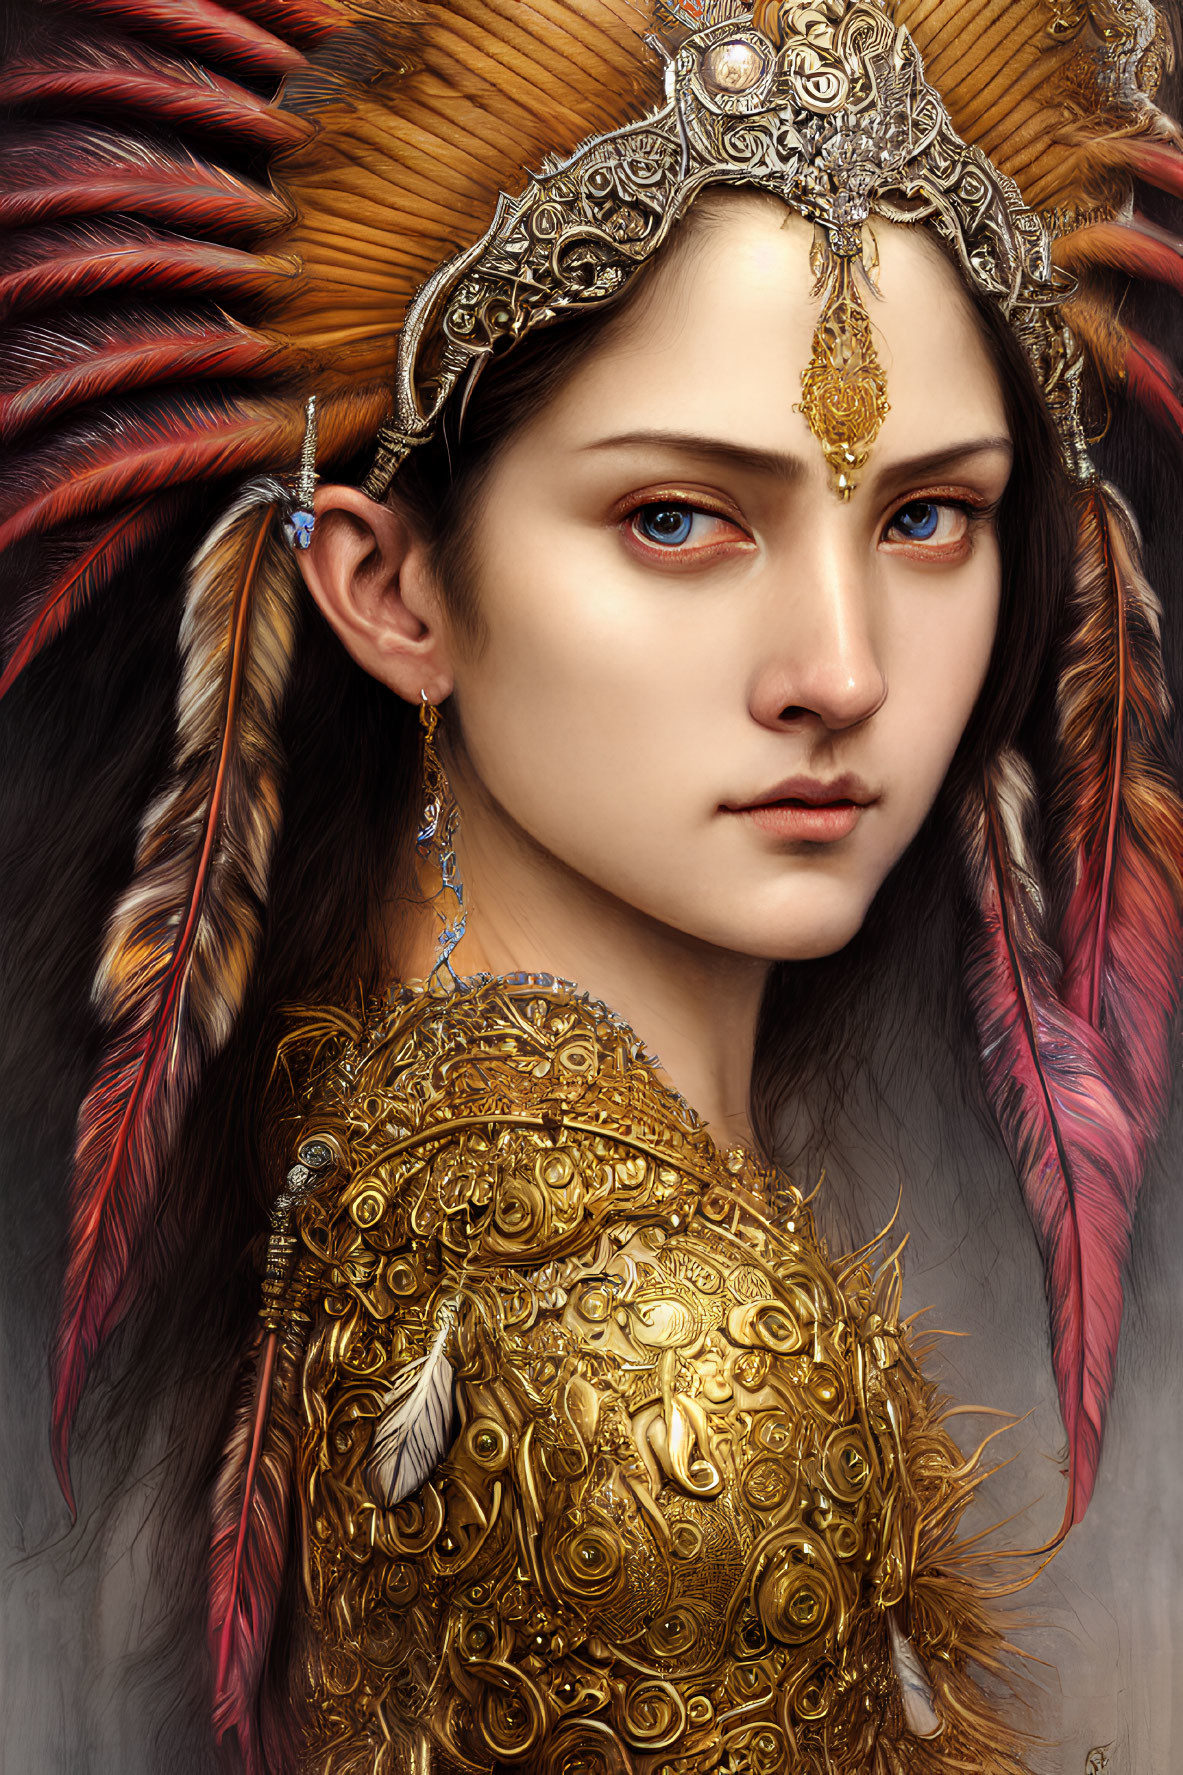 Detailed digital portrait of woman in feathered headdress and golden armor